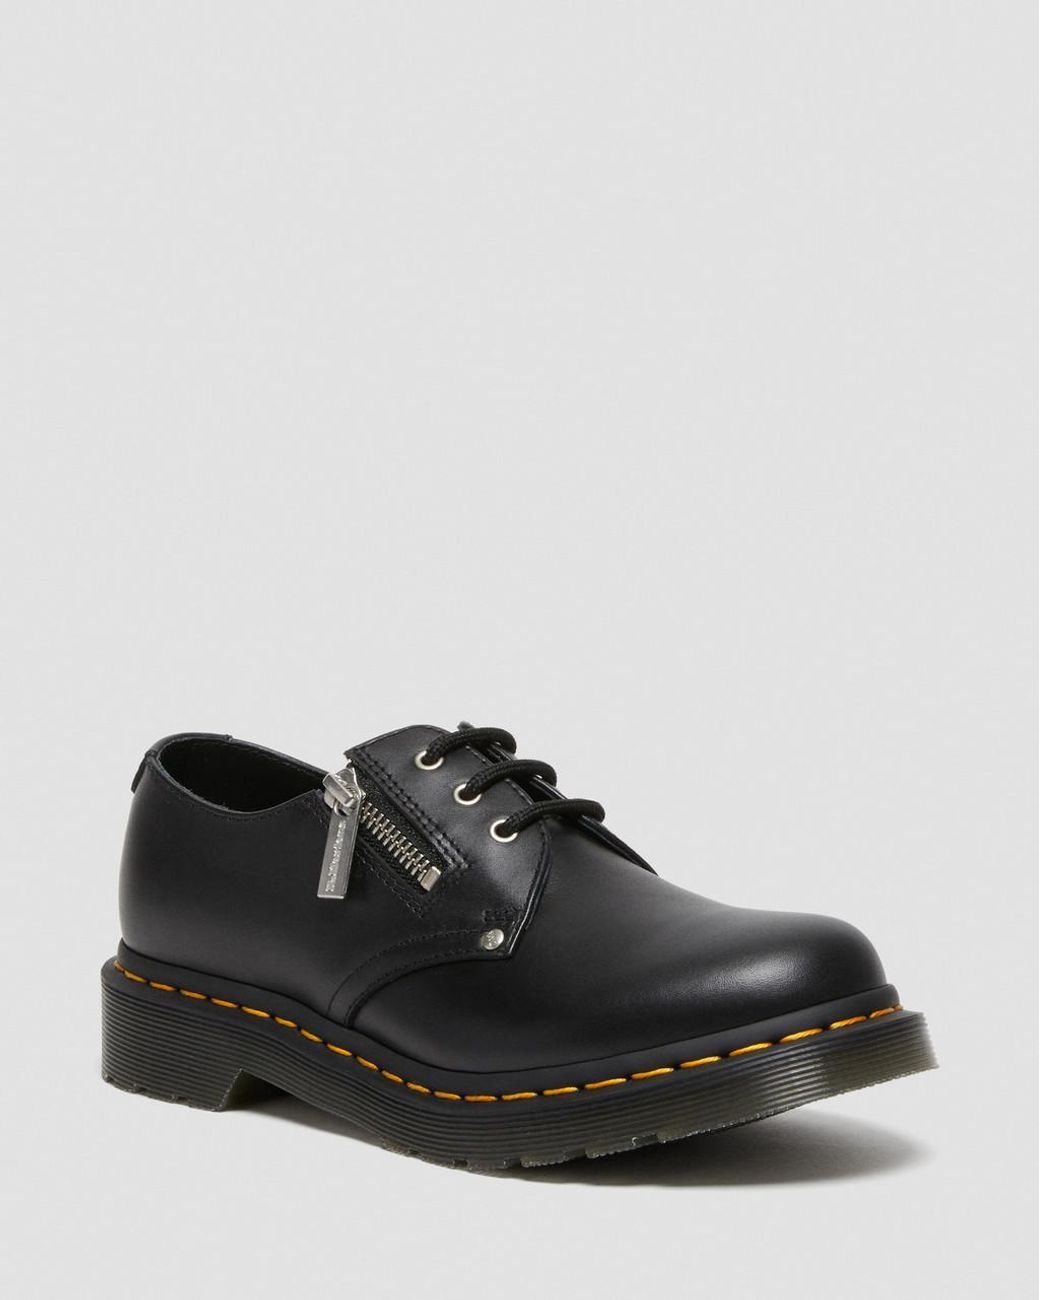 Dr. Martens 1461 Women's Double Zip Leather Oxford Shoes in Black | Lyst